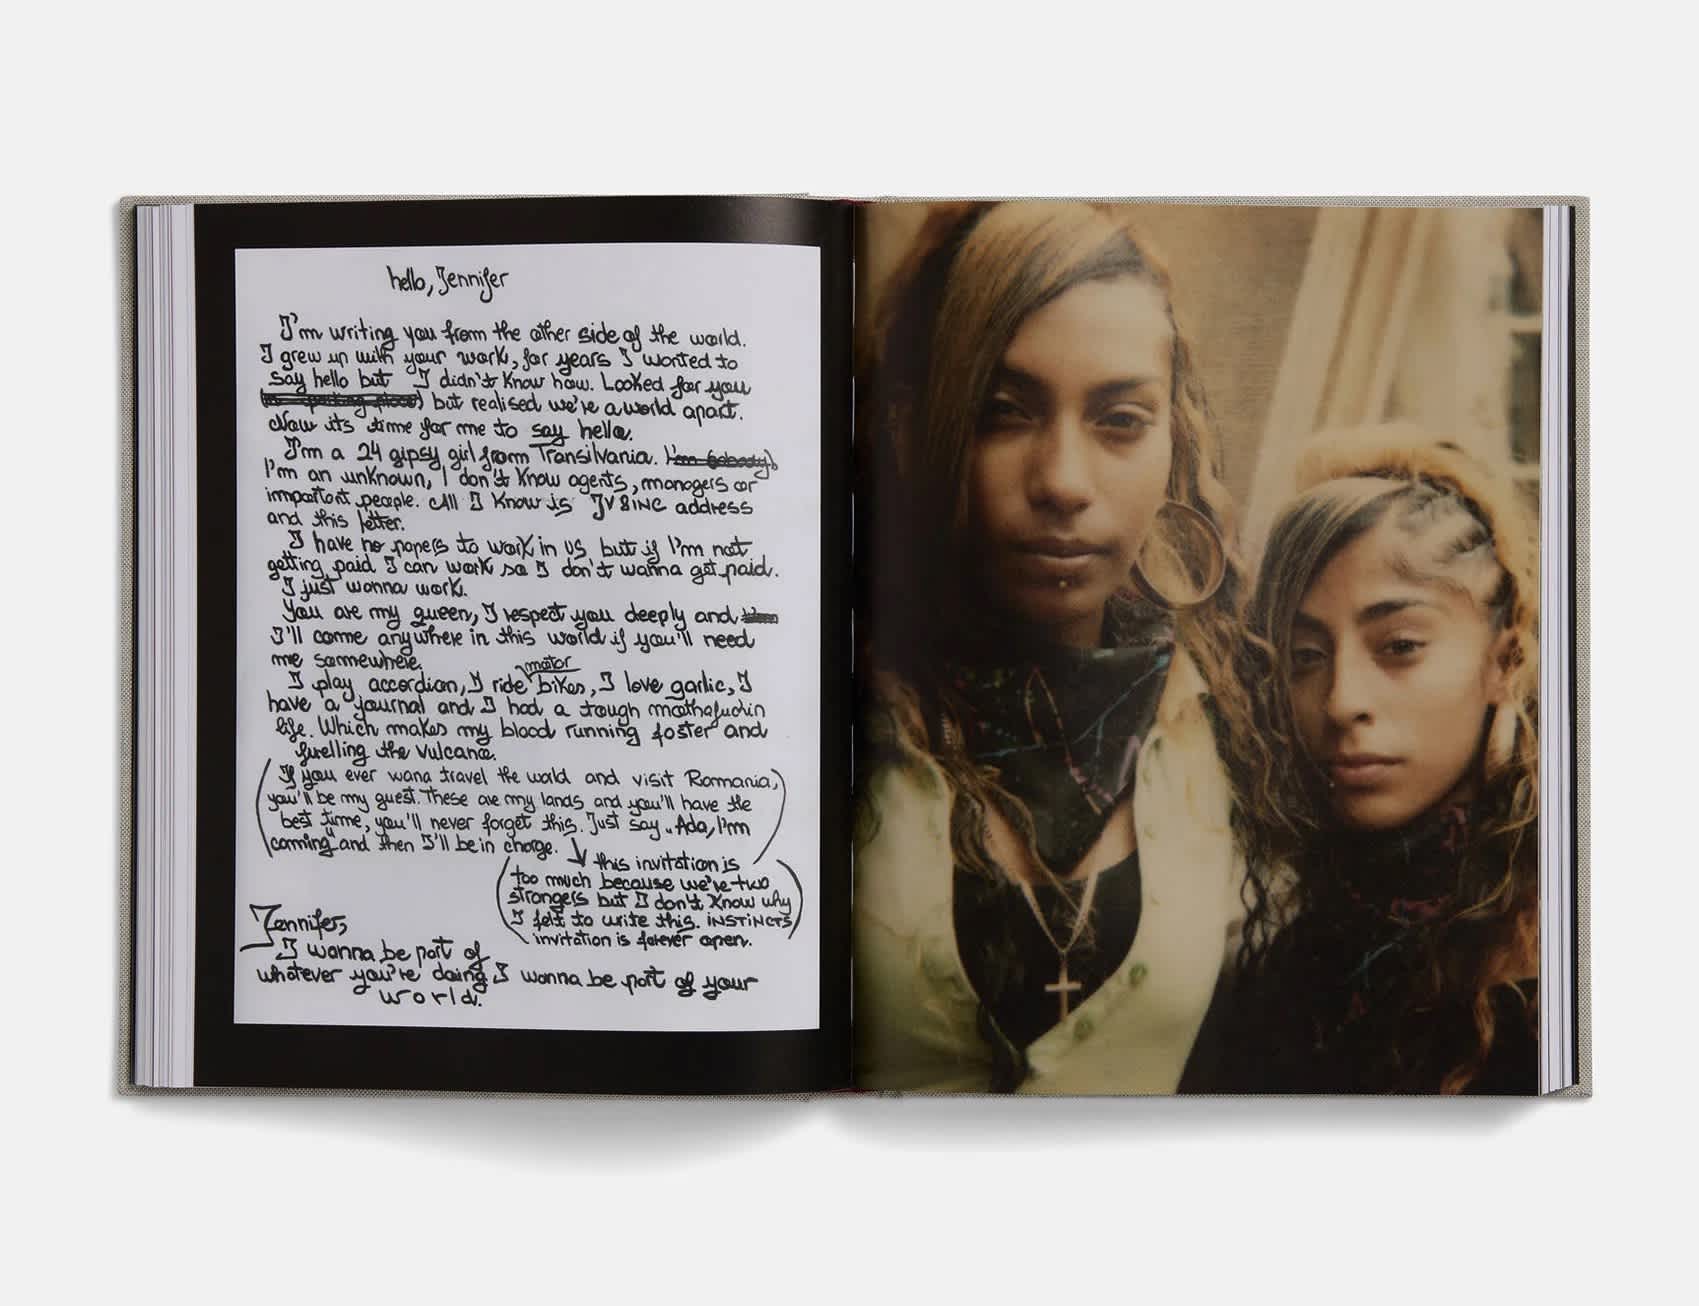 Book interior. The left page is a scan of a letter imposed on a black background. The right page is a photograph of two girls, the one on the left is taller. The photo has an overall yellow-orange hue.